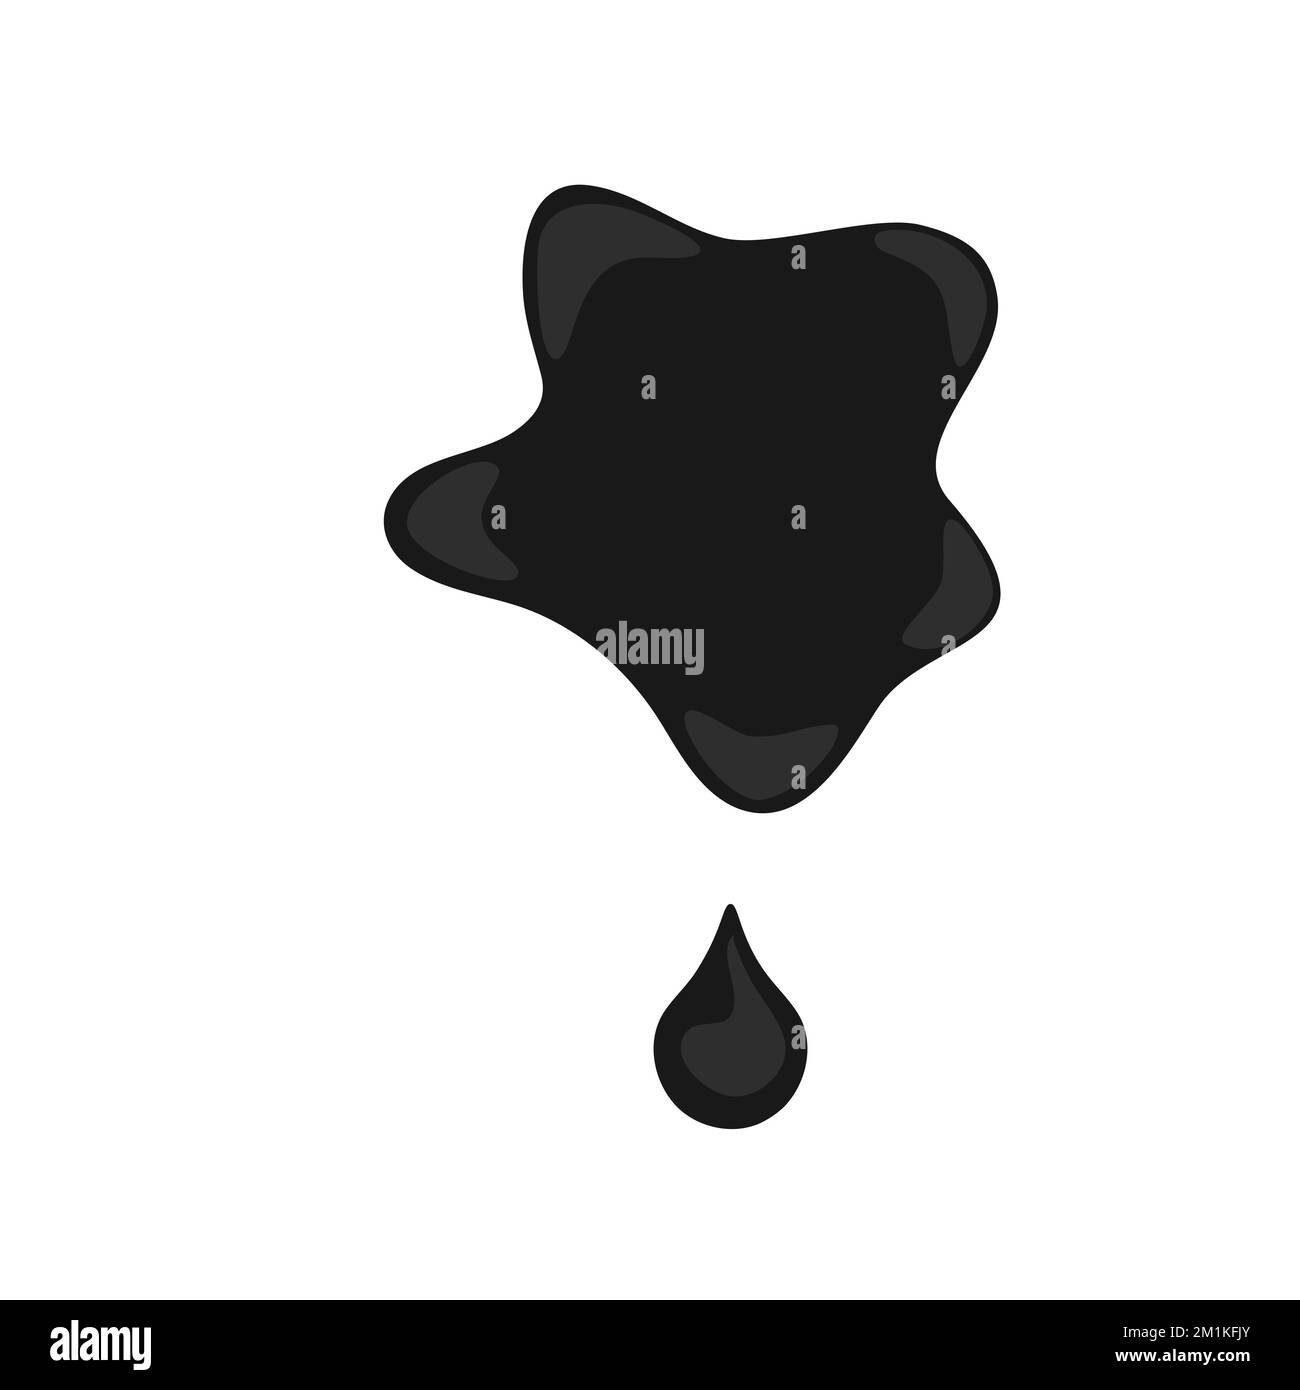 Black oil spill stain with a drop icon Stock Vector